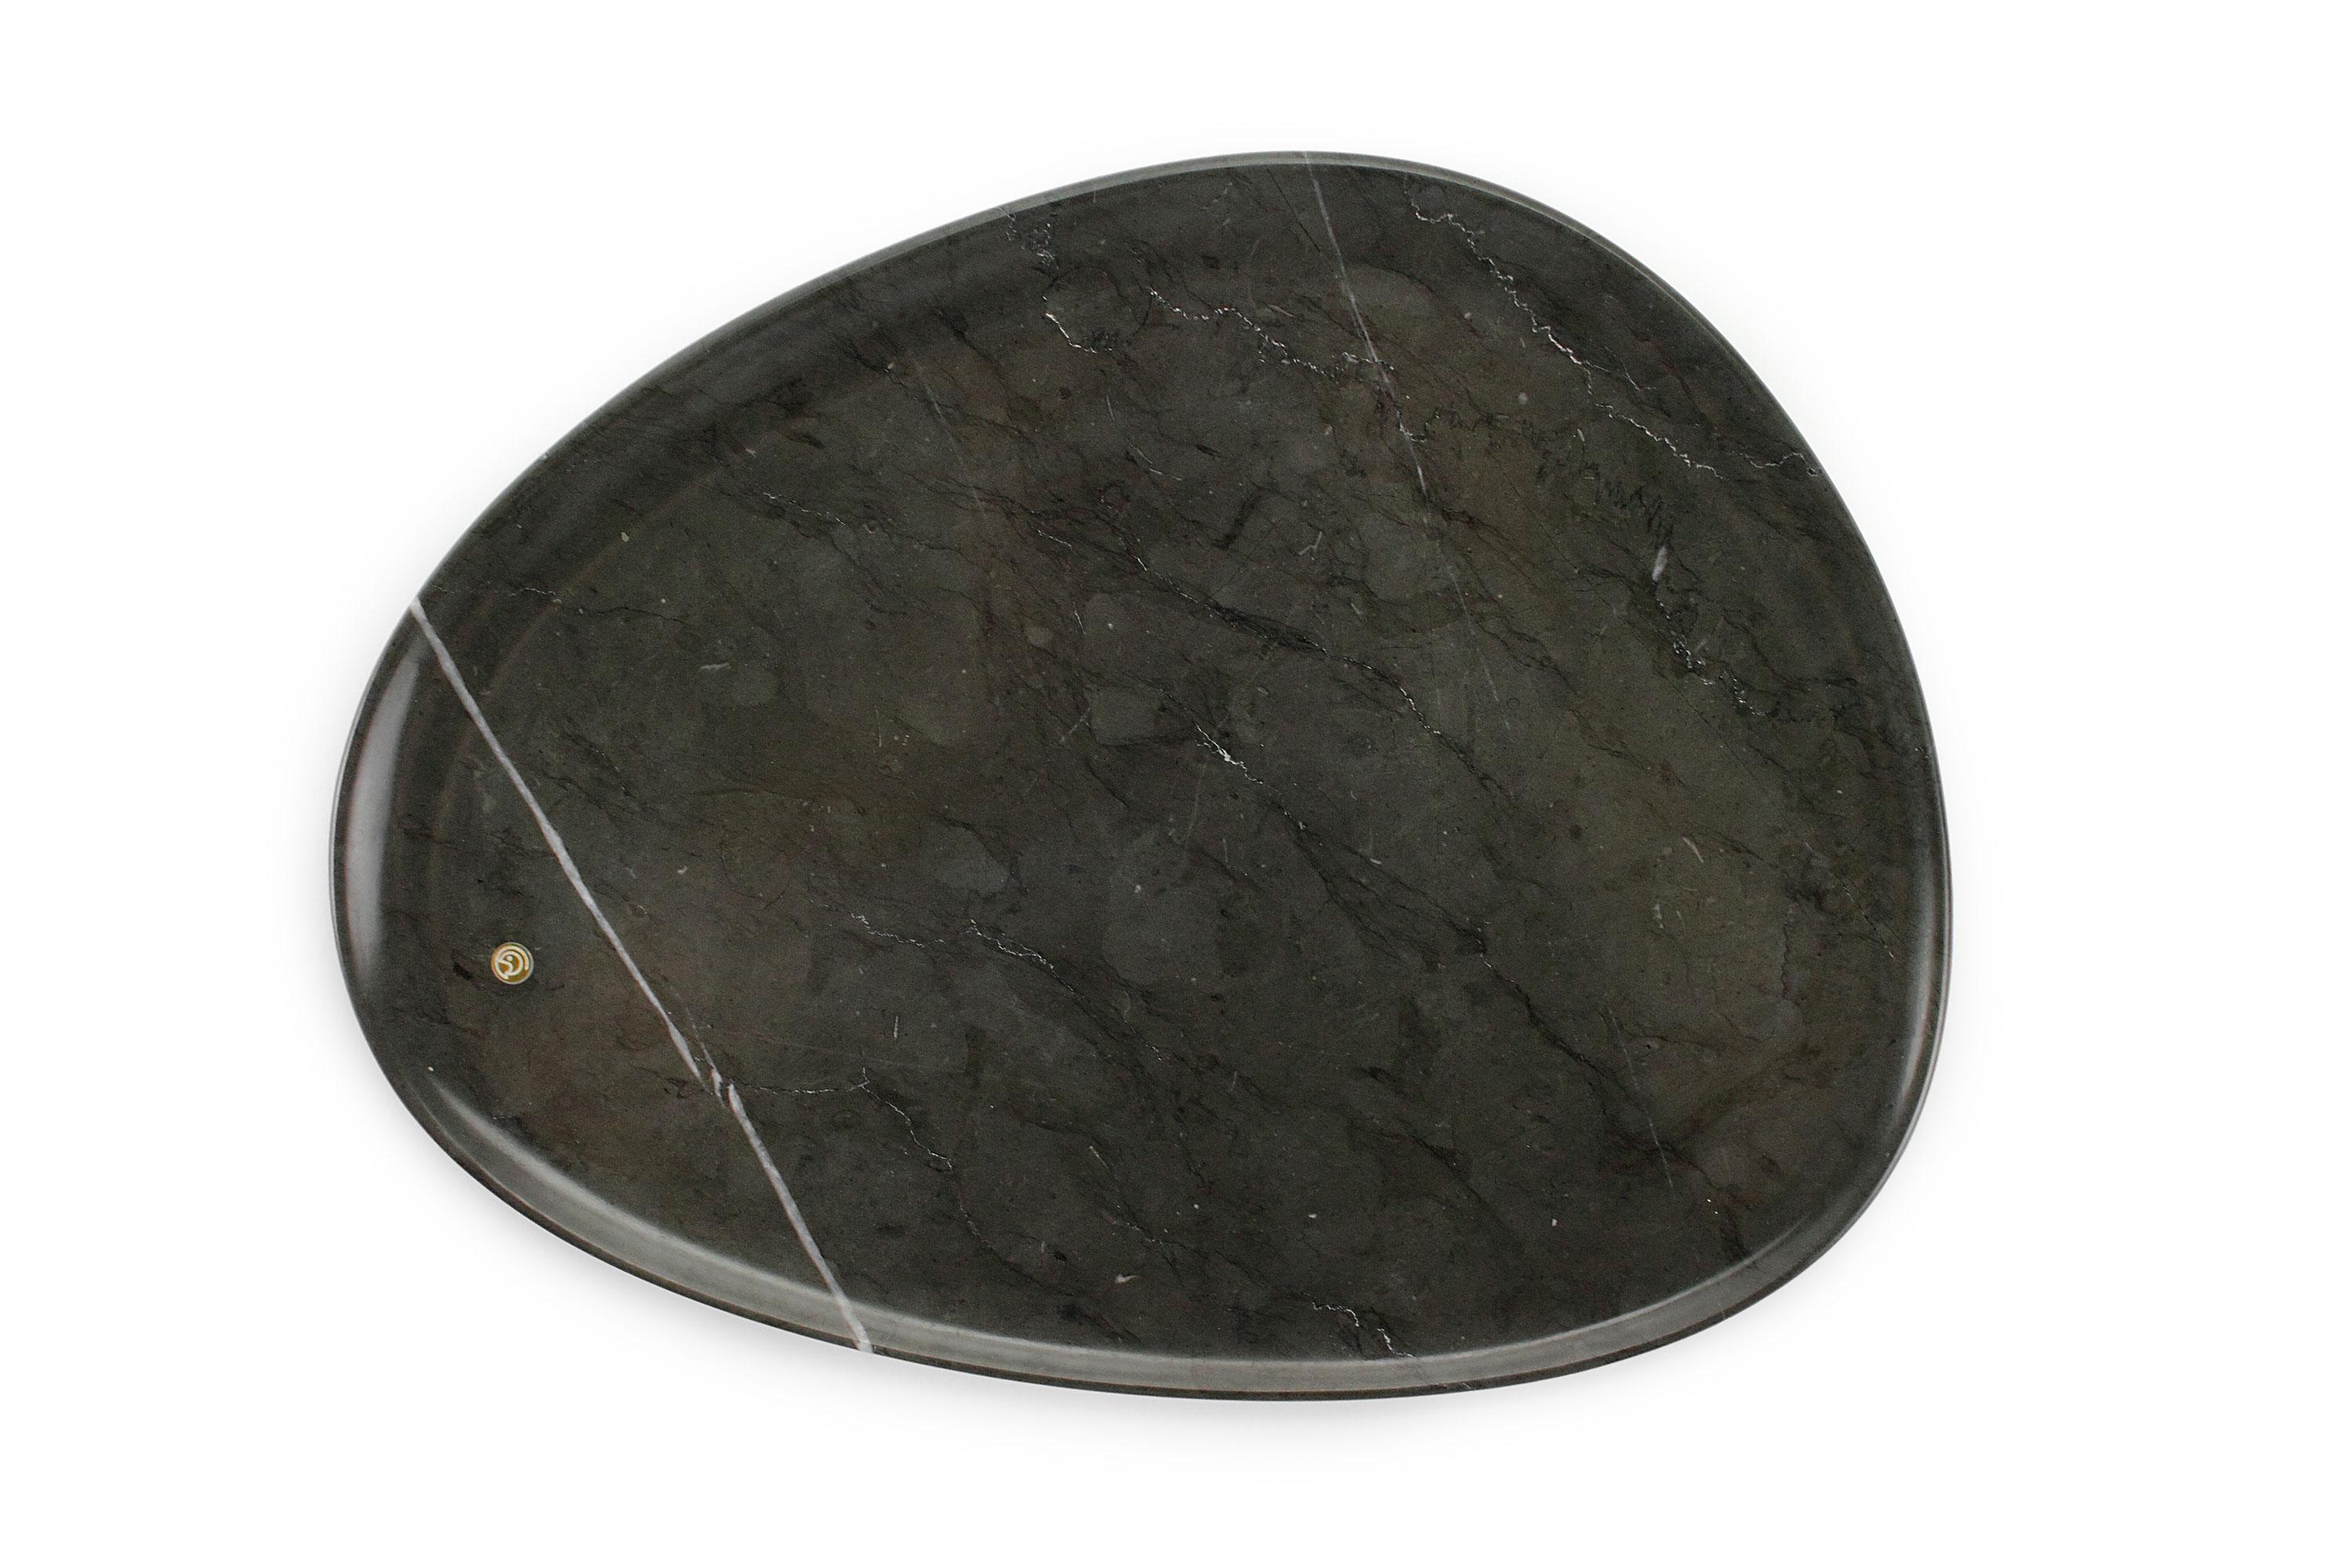 Hand carved presentation plate from grey stone. Multiple use as plates, platters and placers. 

Dimensions: Medium - L30 W28 H1.8 cm, also available: Small - L 24 W 20 H 1.8 cm / Big - L 36 W 35 H 1.8 cm.
Available in different marbles, onyx and